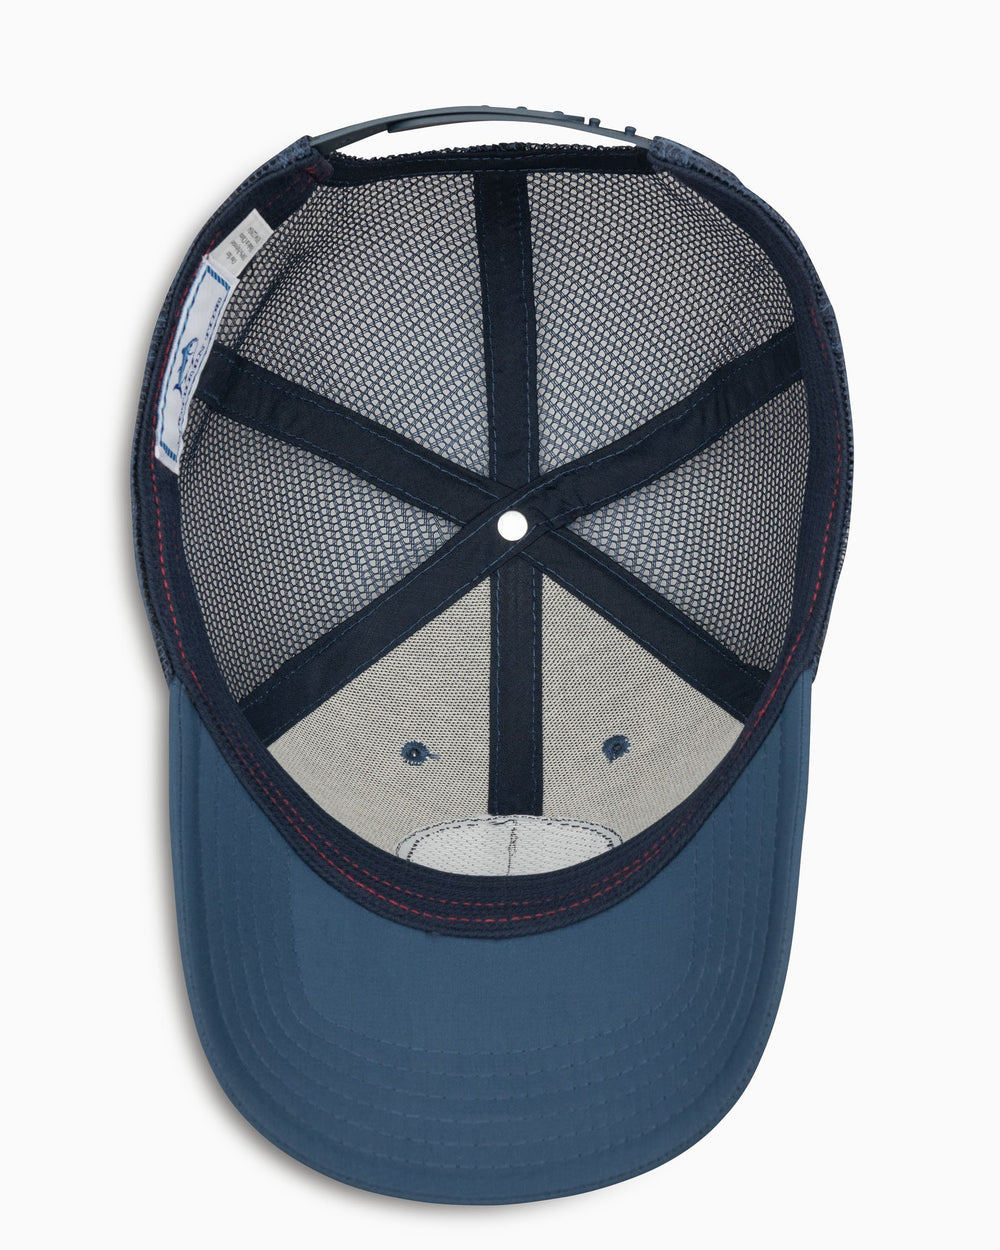 The below view of the Men's Tennessee Patch Performance Trucker Hat by Southern Tide - Seven Seas Blue